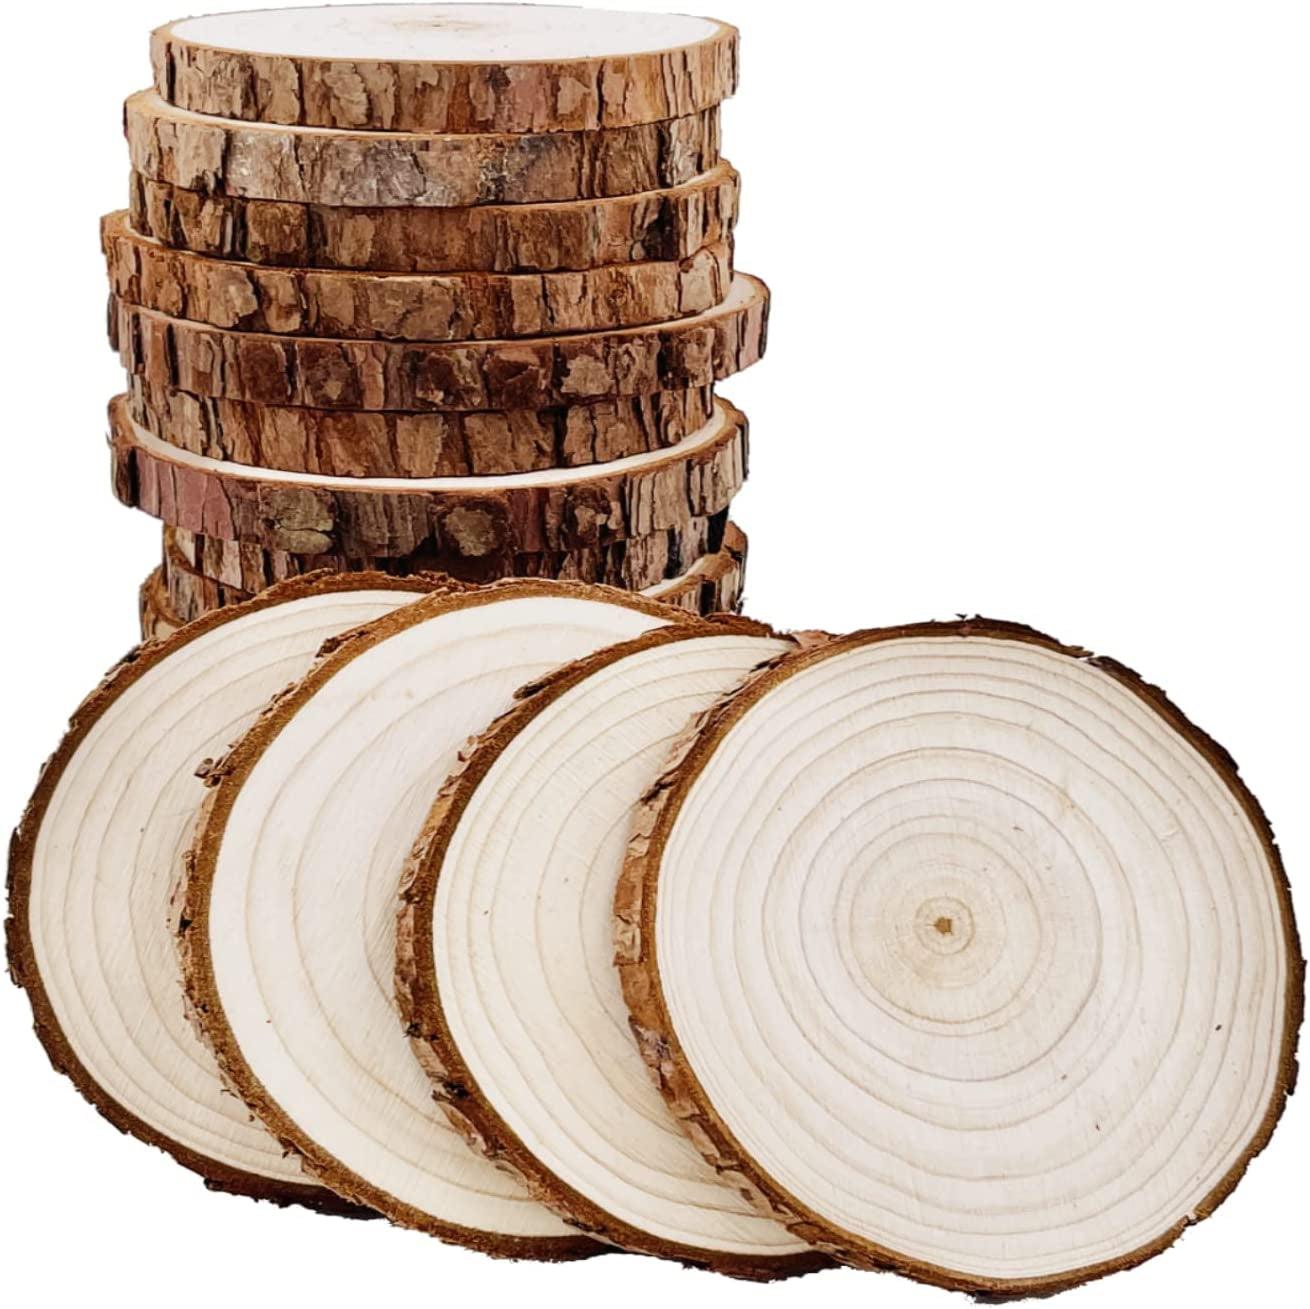 Fuyit Natural Wood Slices 30 Pcs 2.4-2.8 Inches Unfinished Wood Craft Kit Undrilled Wooden Circles Without Hole Tree Slice